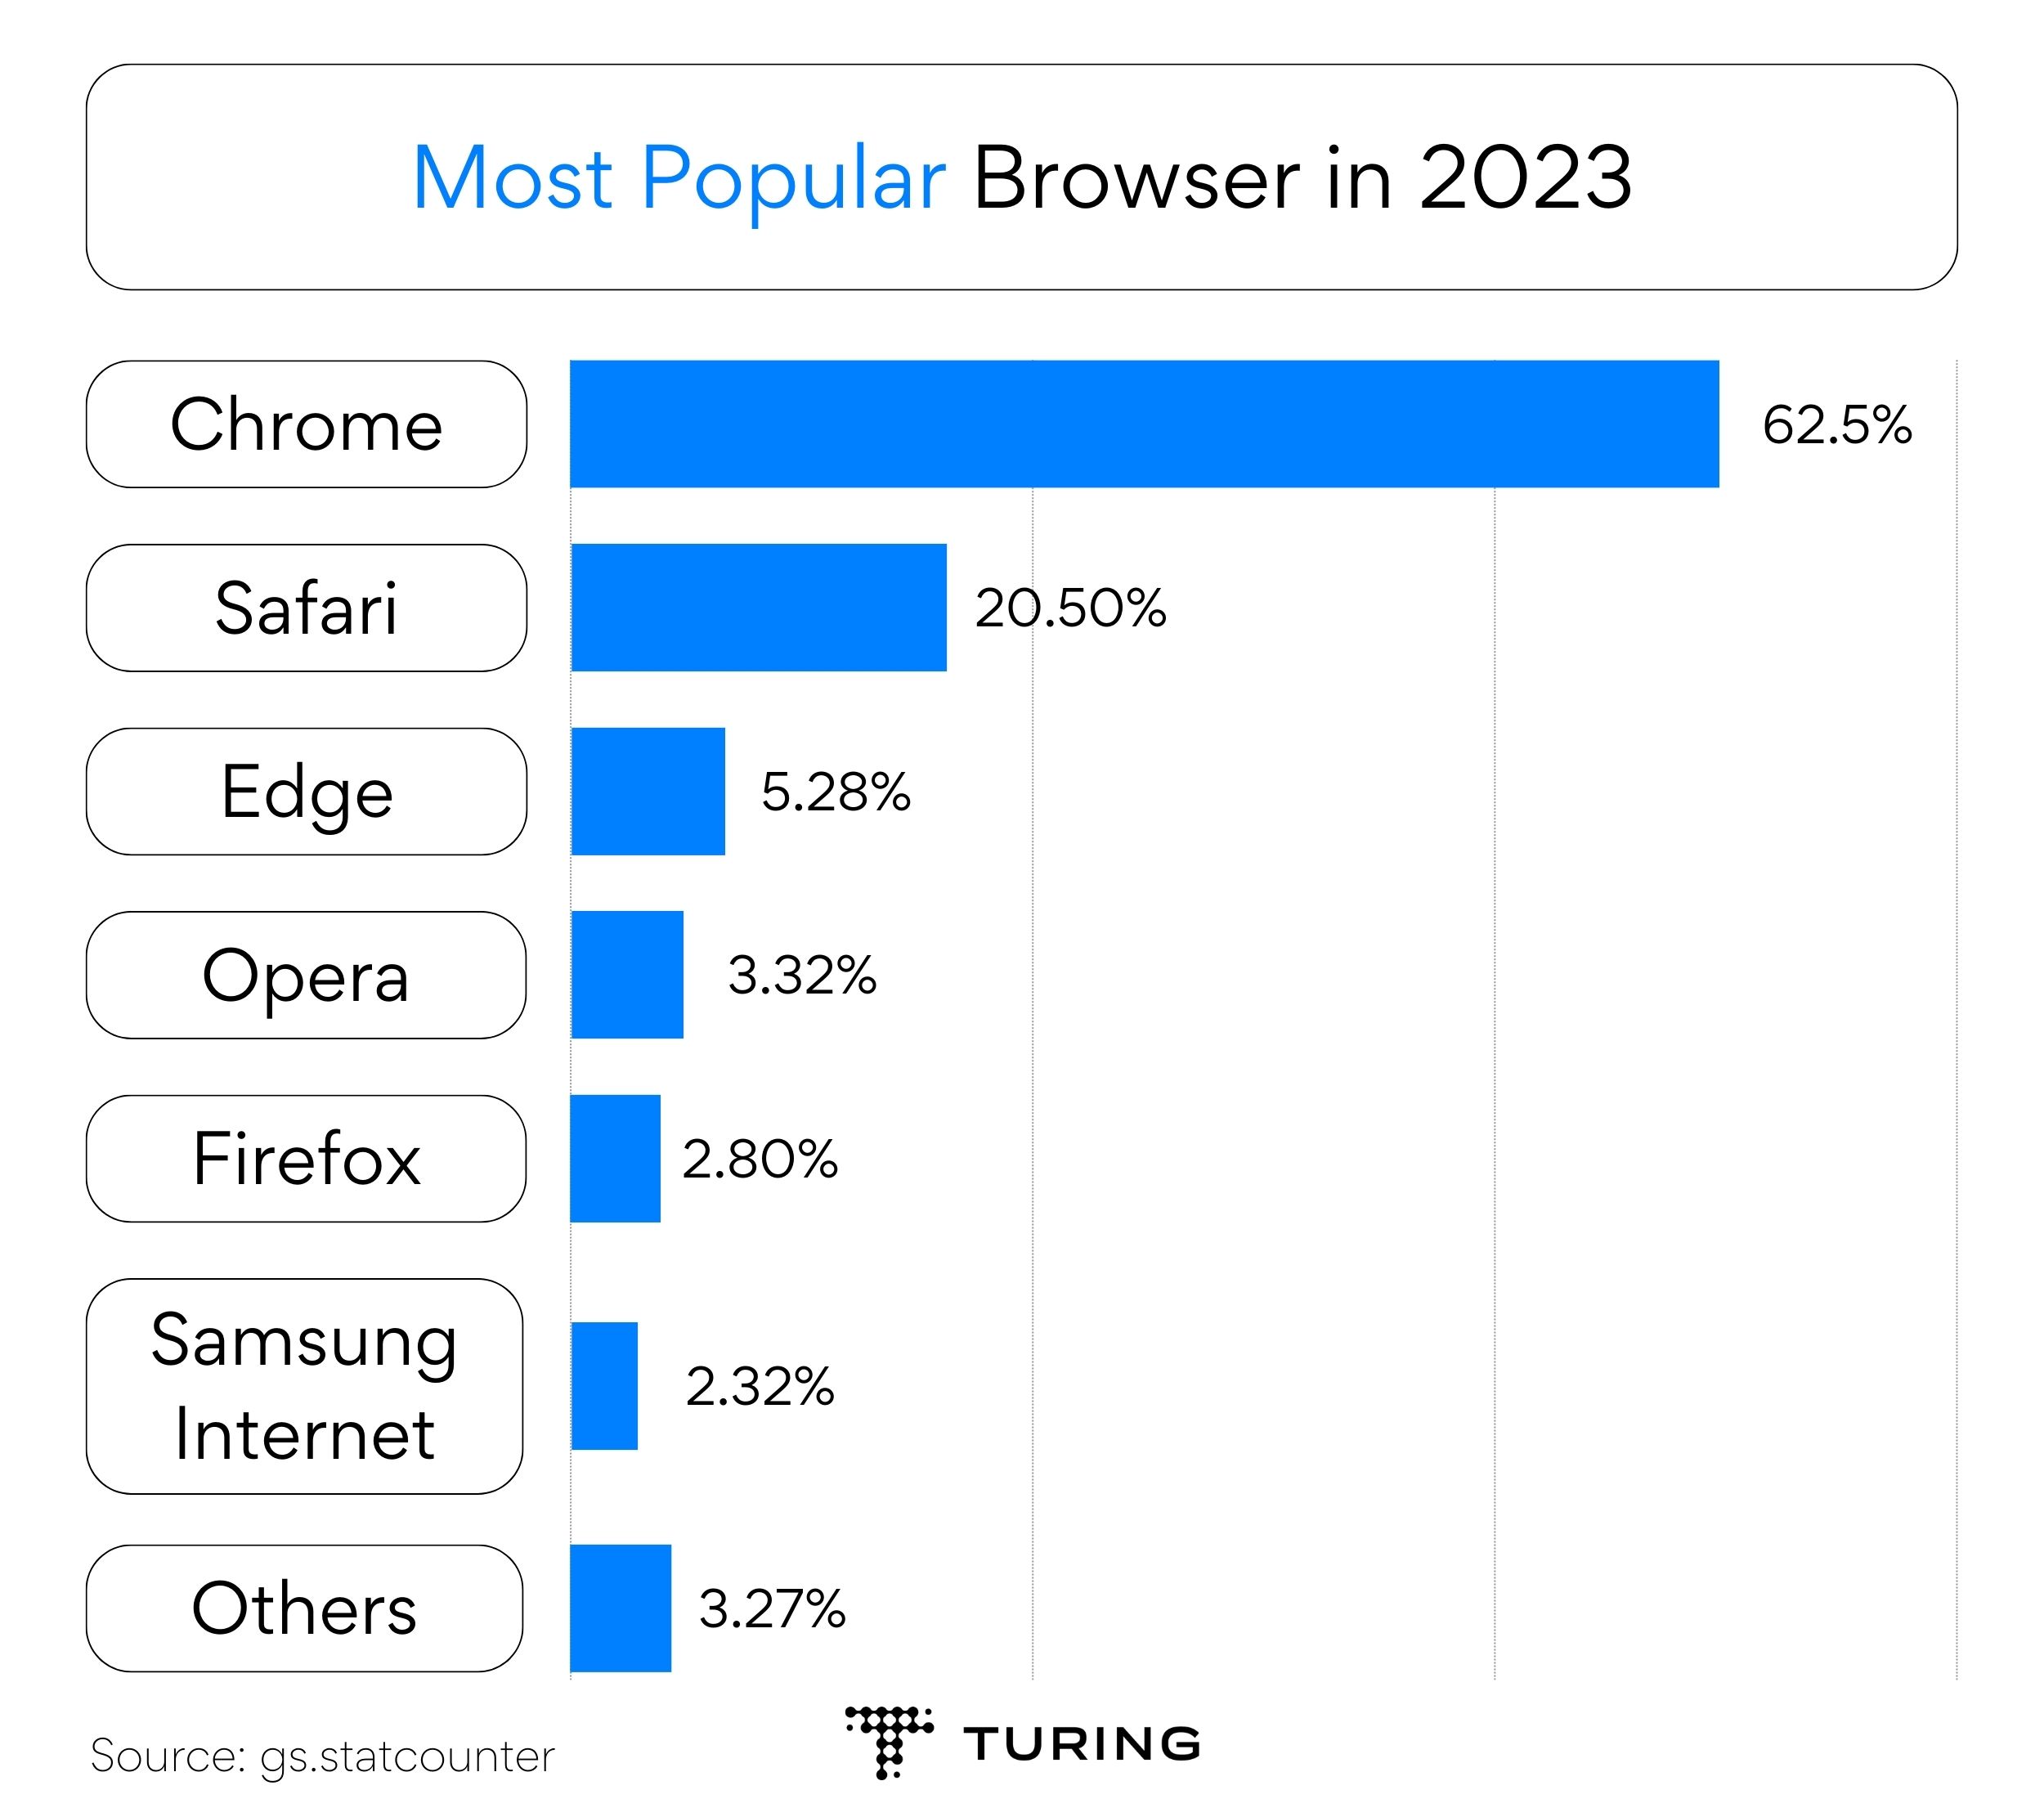 Most Popular Browser in 2023